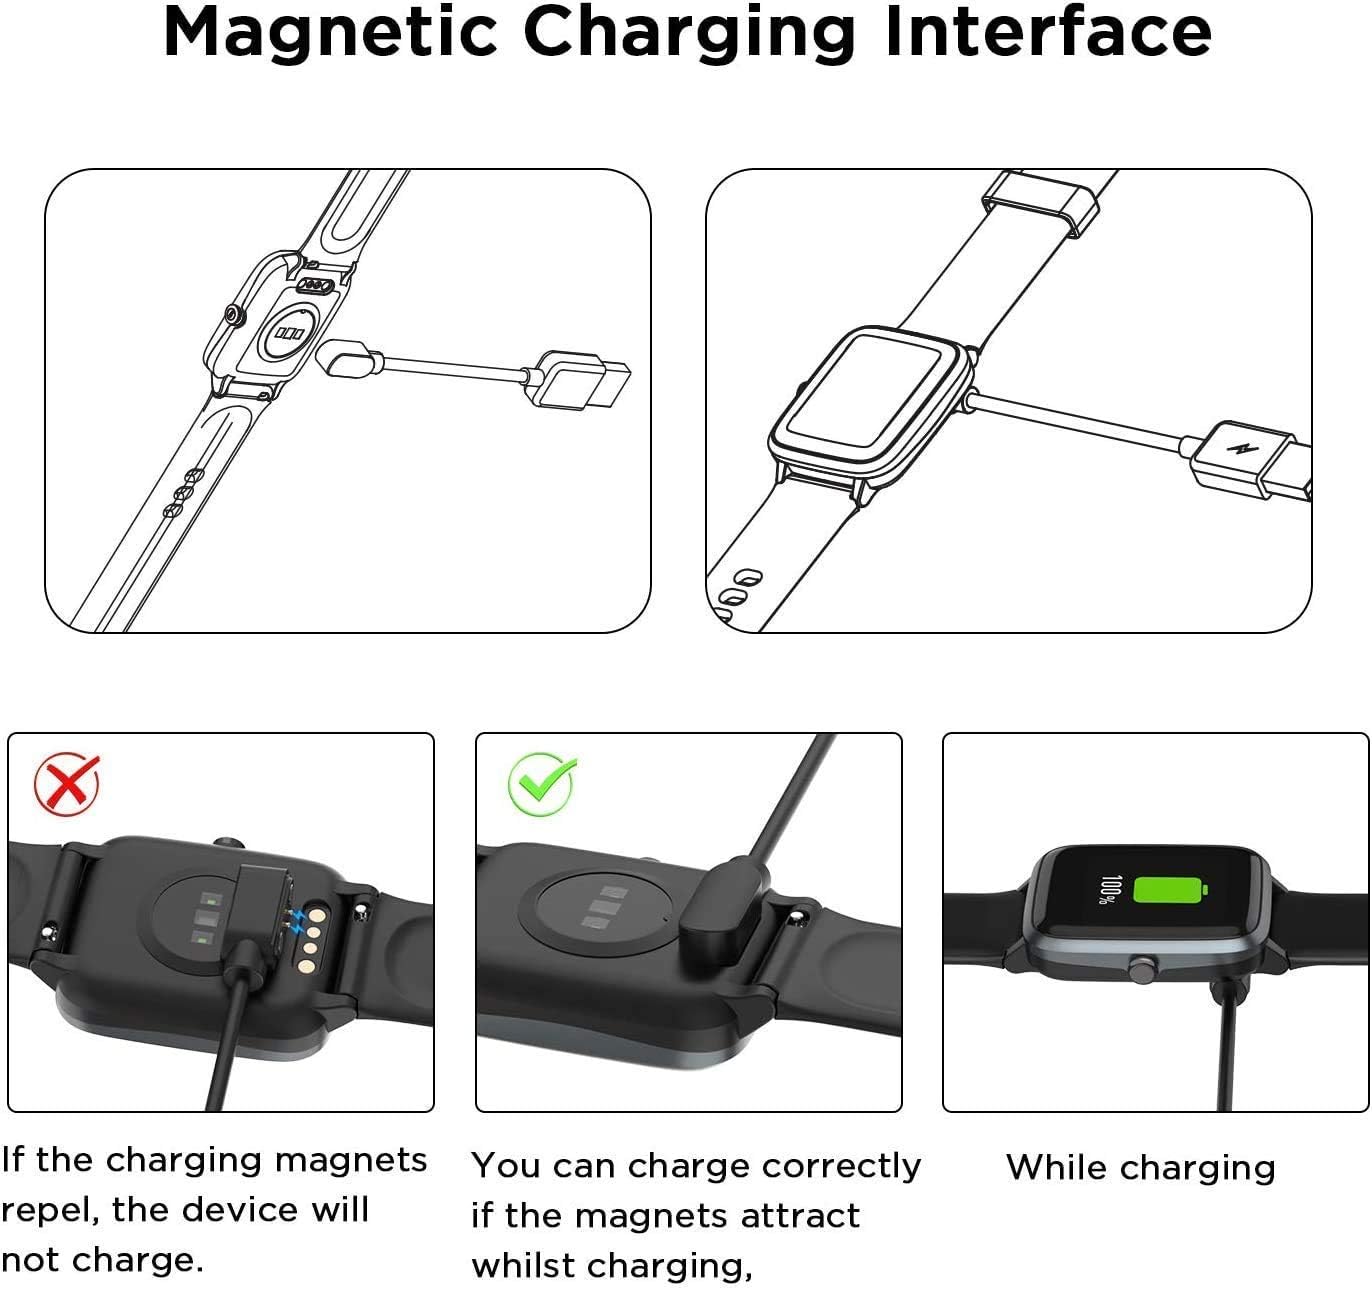 Lamshaw's Magnetic Smart Watch Charger: A Comprehensive Review on its Compatibility and Performance